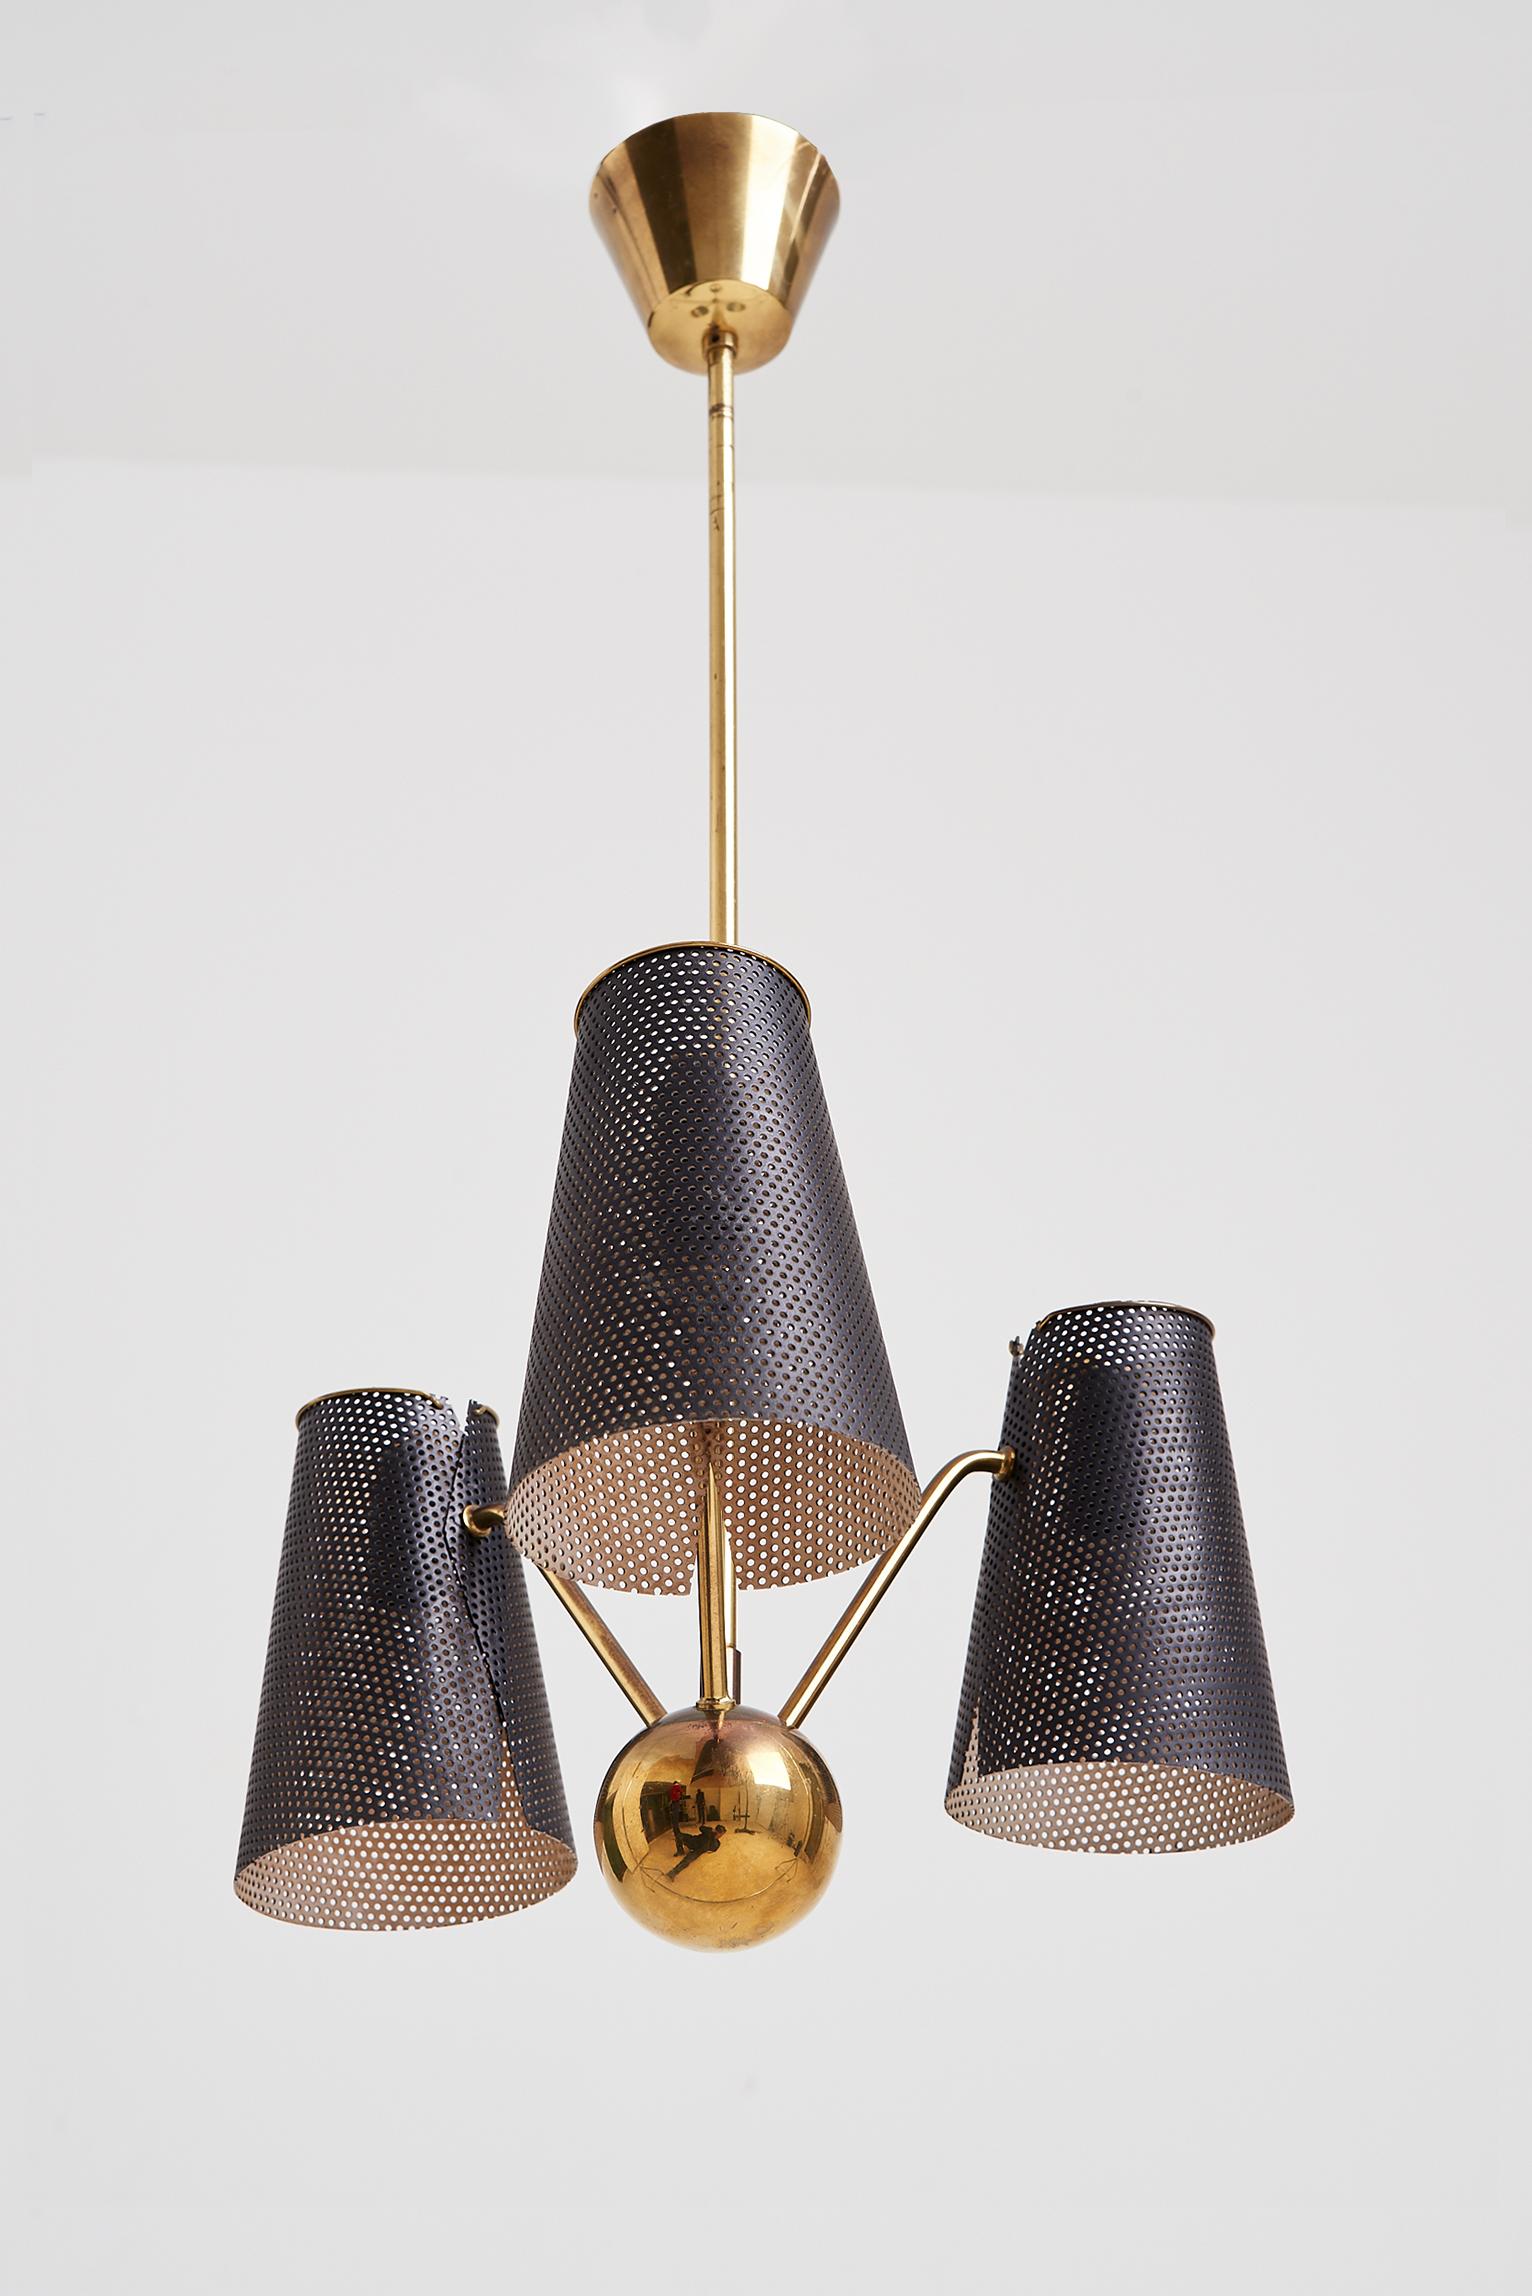 French Mid-Century Brass and Black Rigitule Ceiling Light